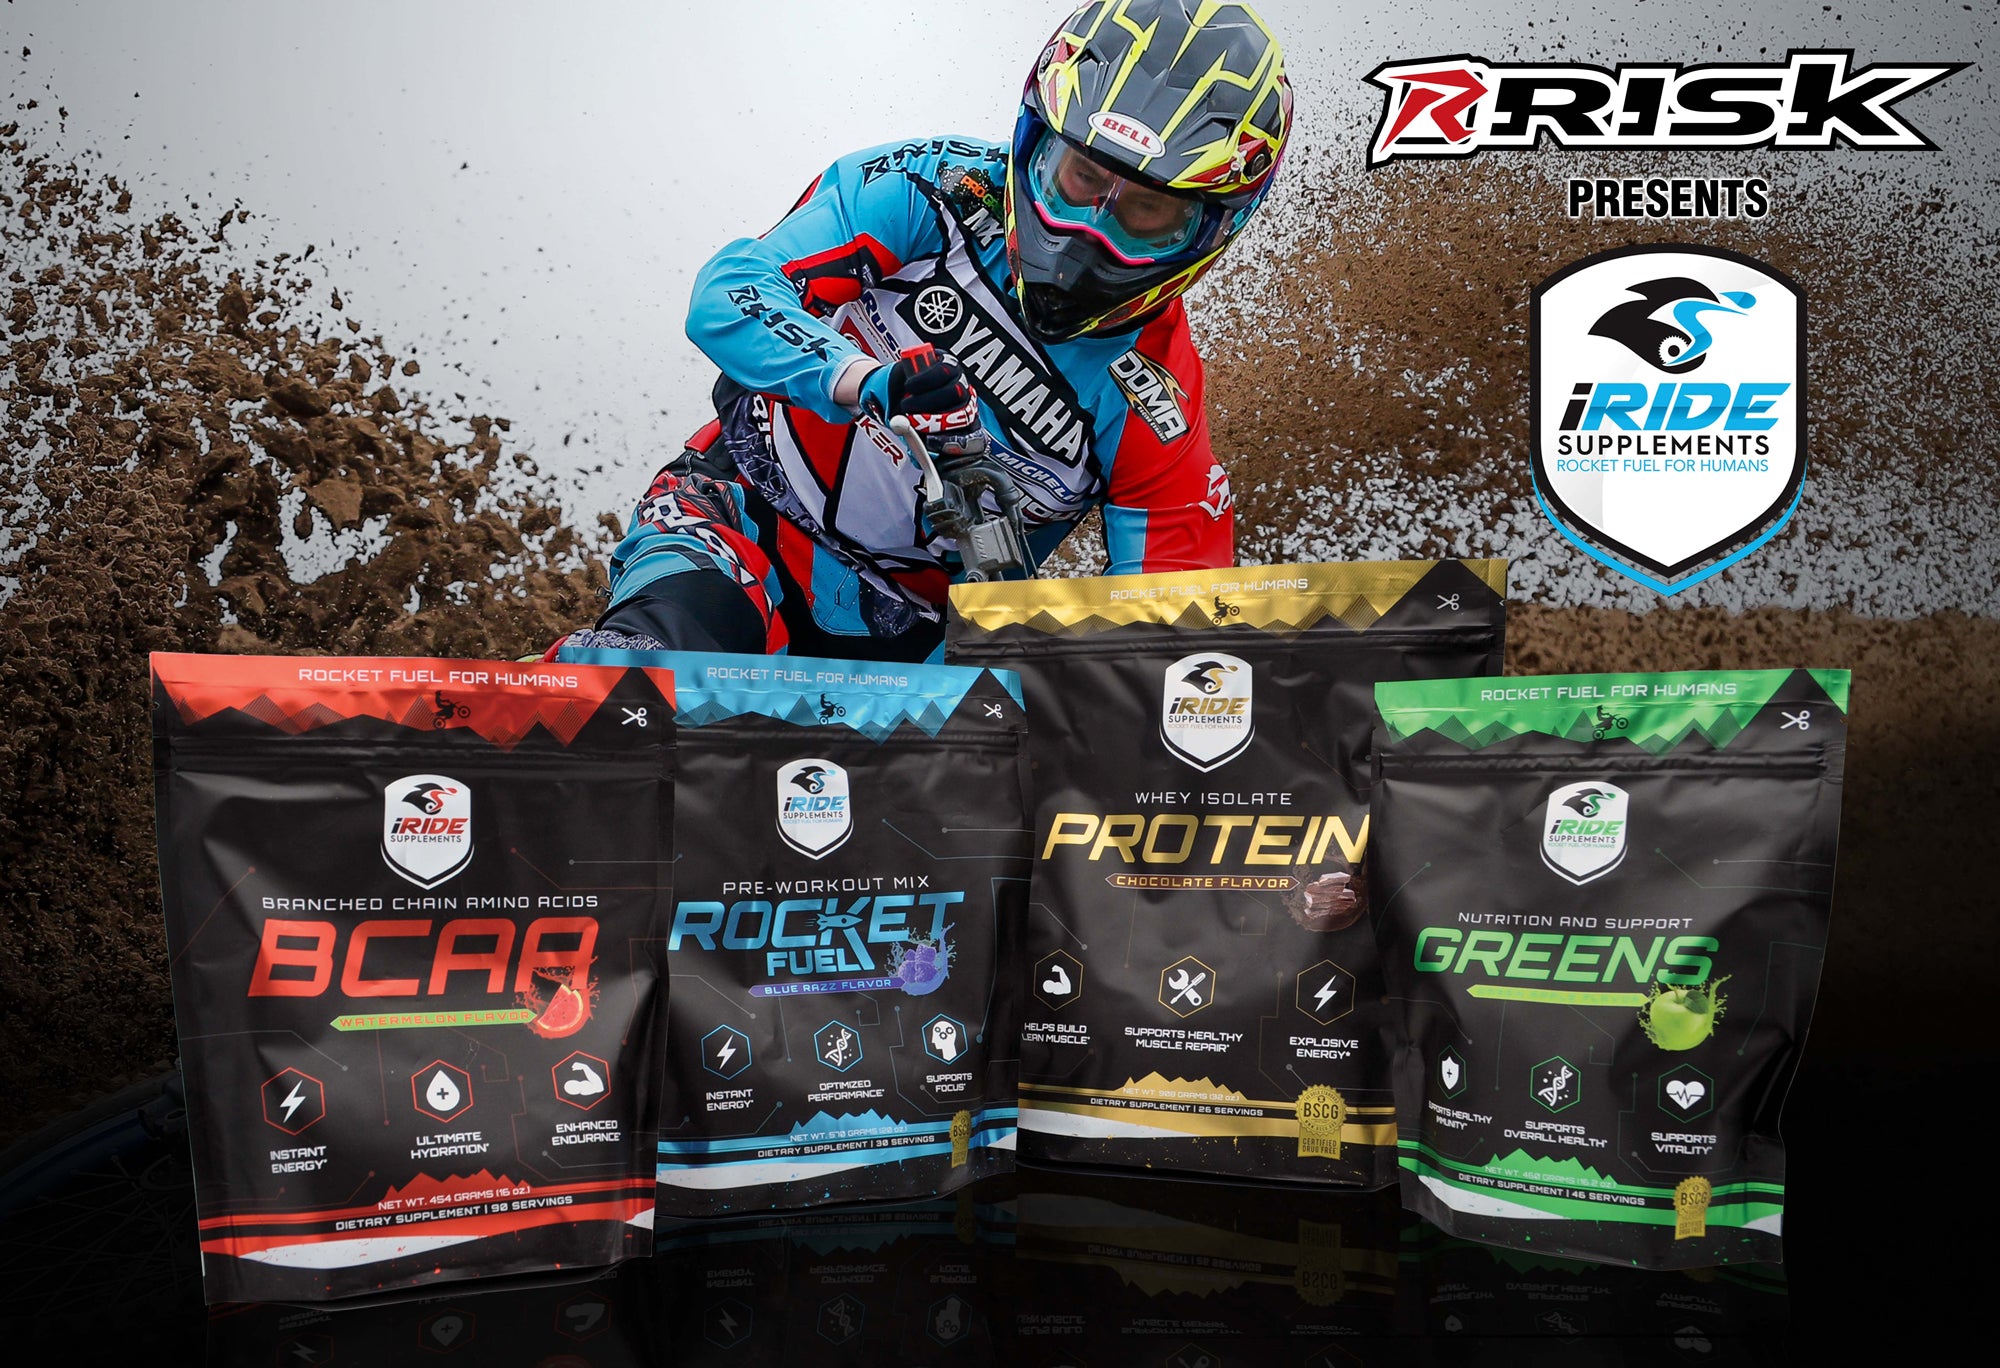 iRide banner featuring bcaa, rocket fuel, protein, and greens powdered supplements. MX racer throwing dirt through a corner in the background